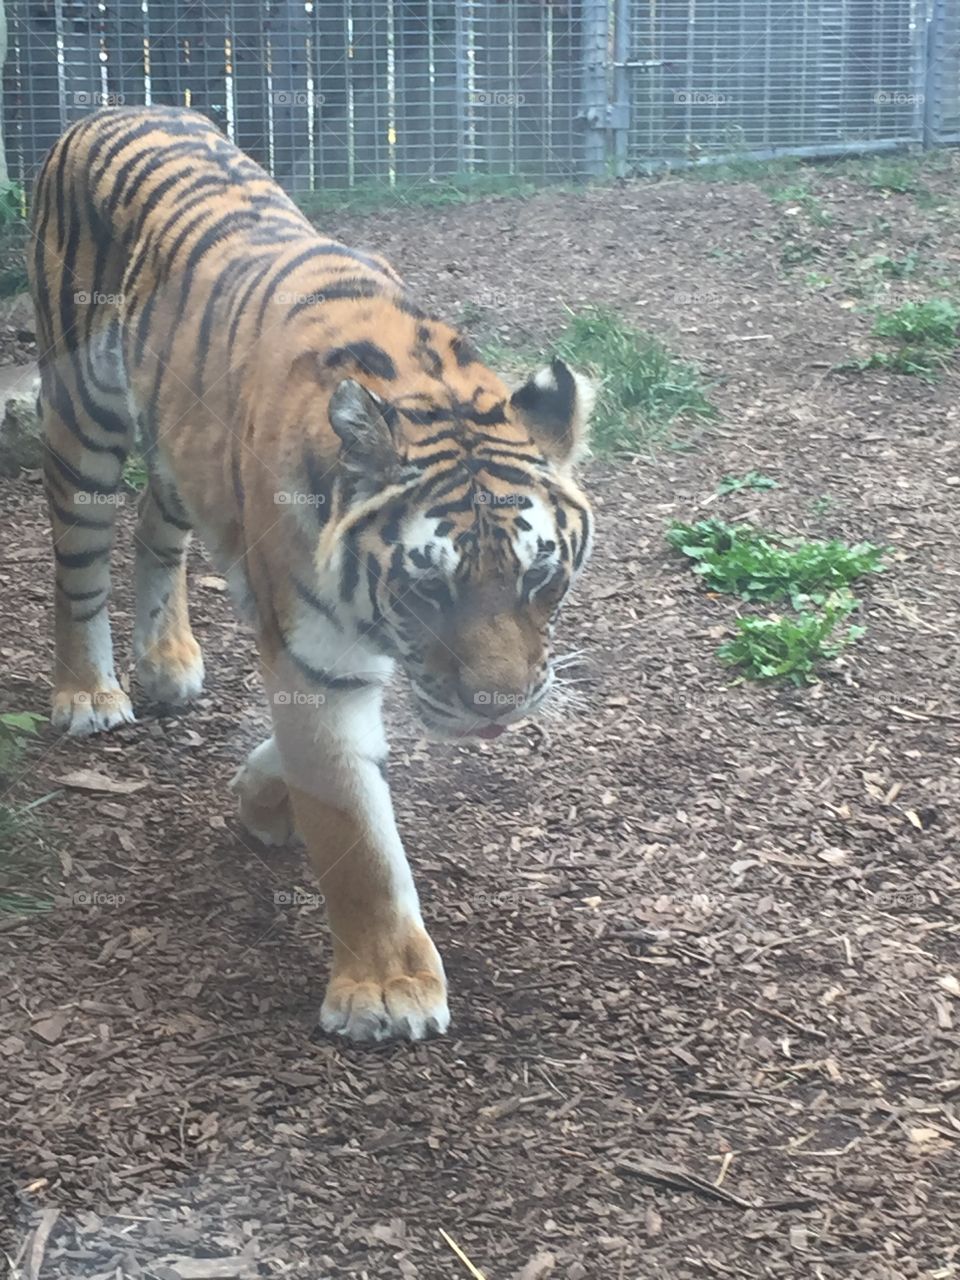 Tiger sticking its tongue out